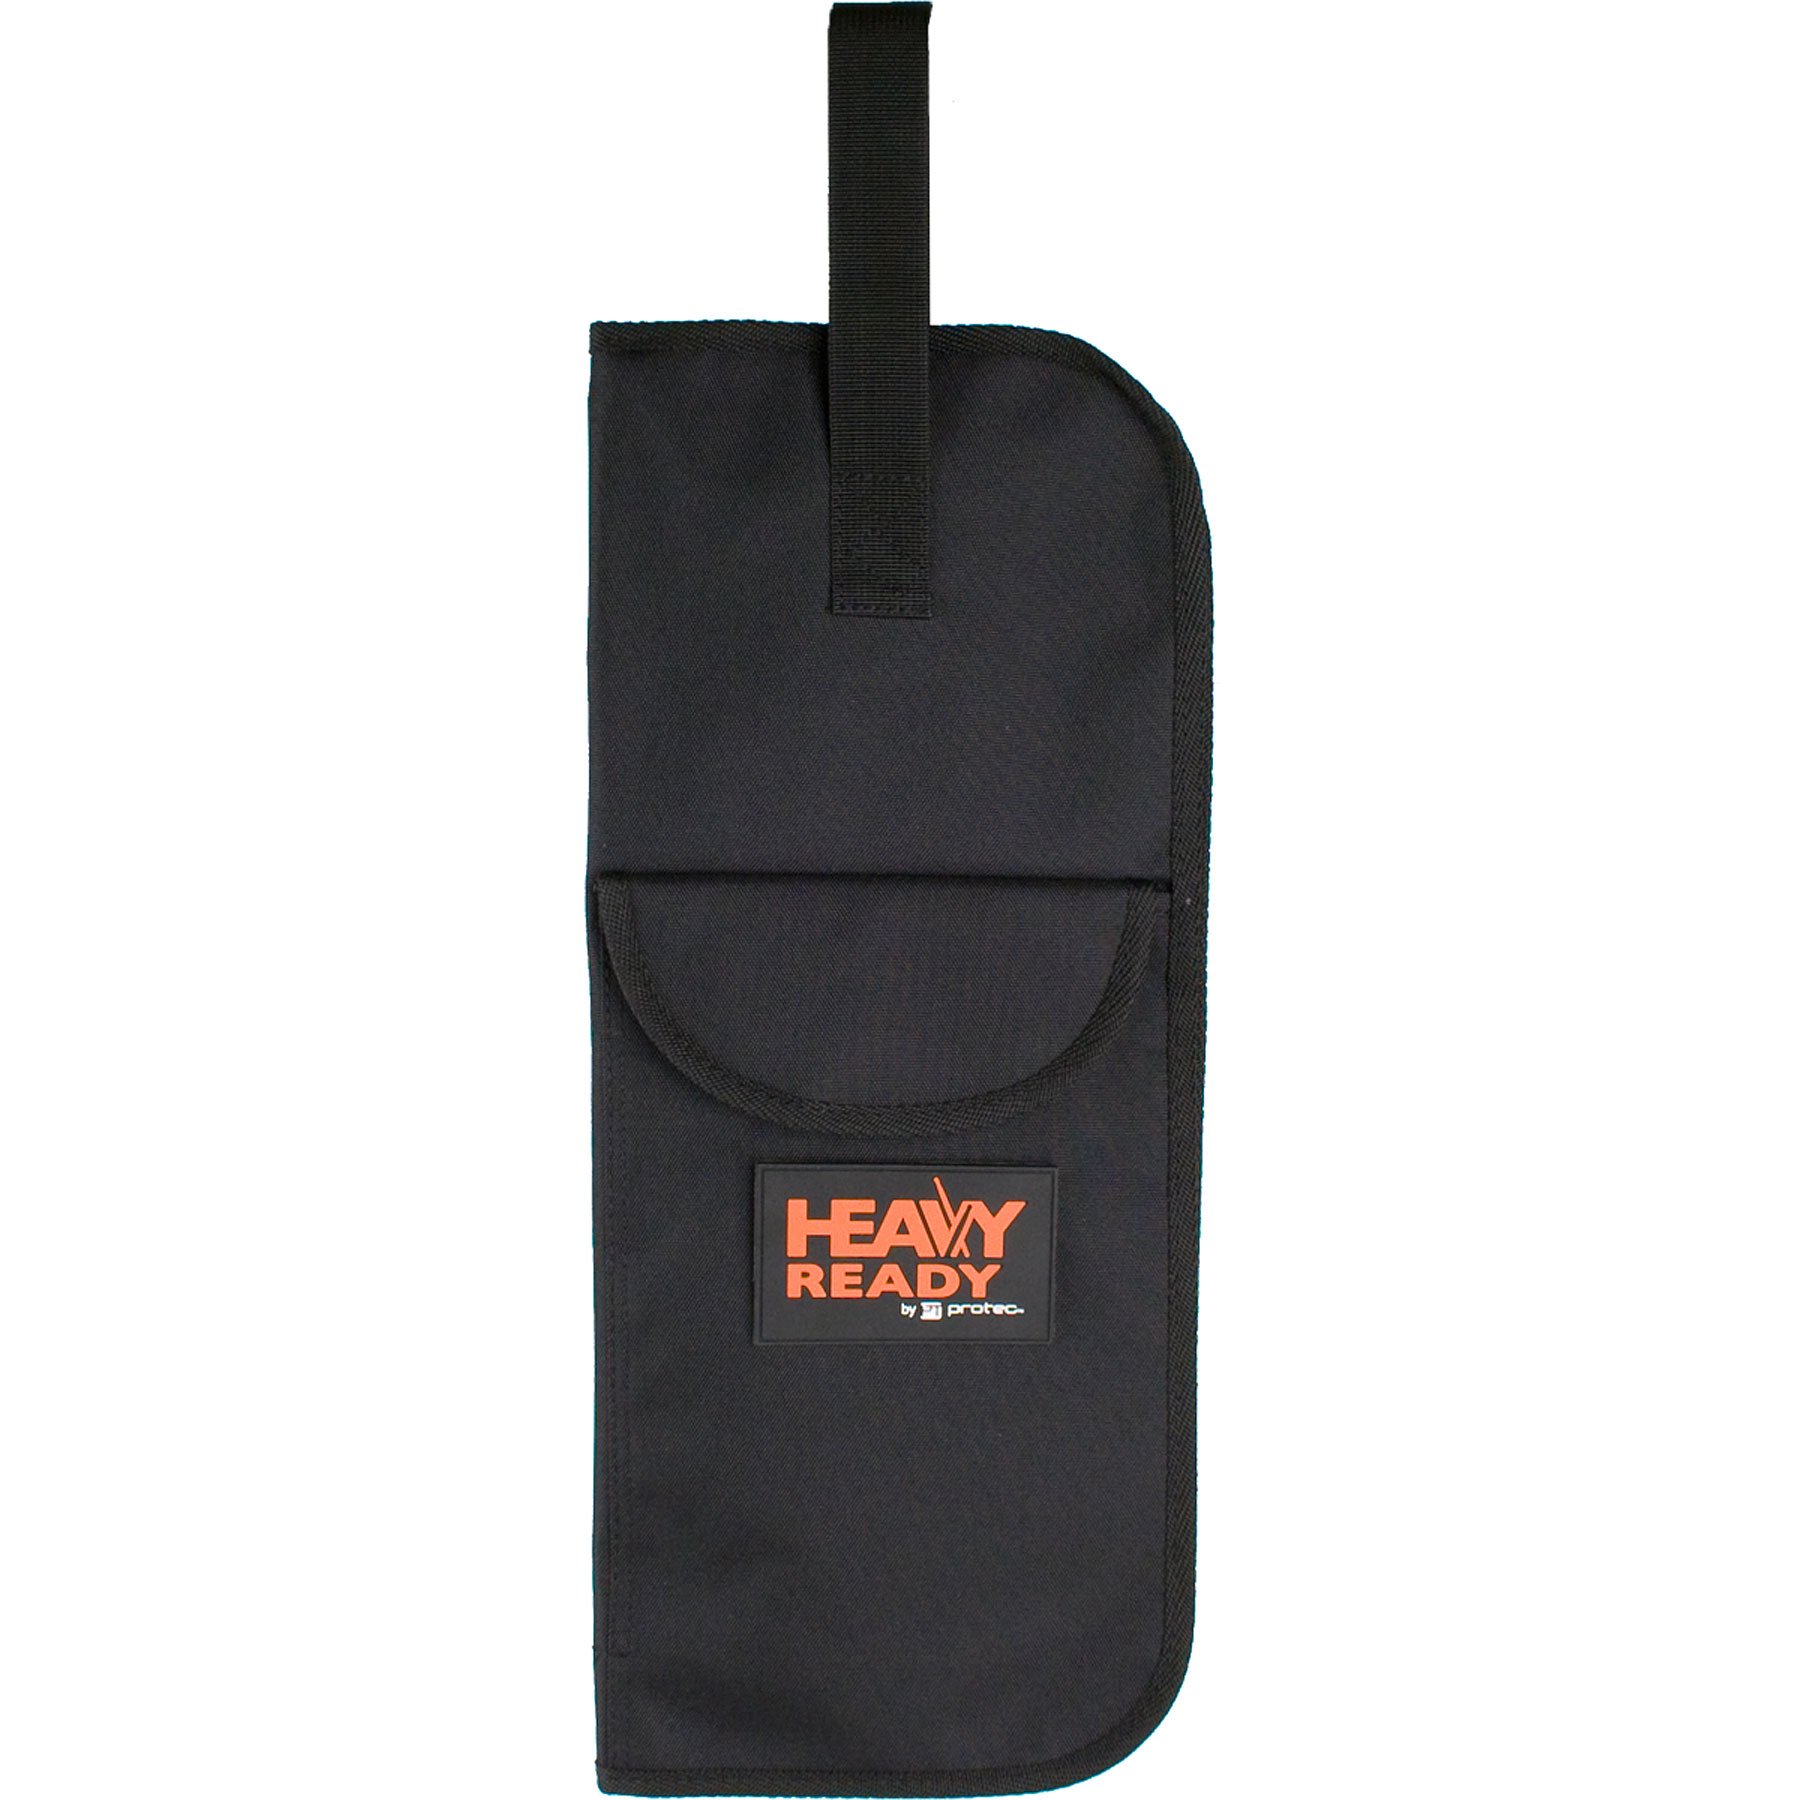 Pro Tec Protec Heavy Ready Series Drum Stick Mallet Bag For Up To 8 Pairs Of Sticks, Model  Hr337